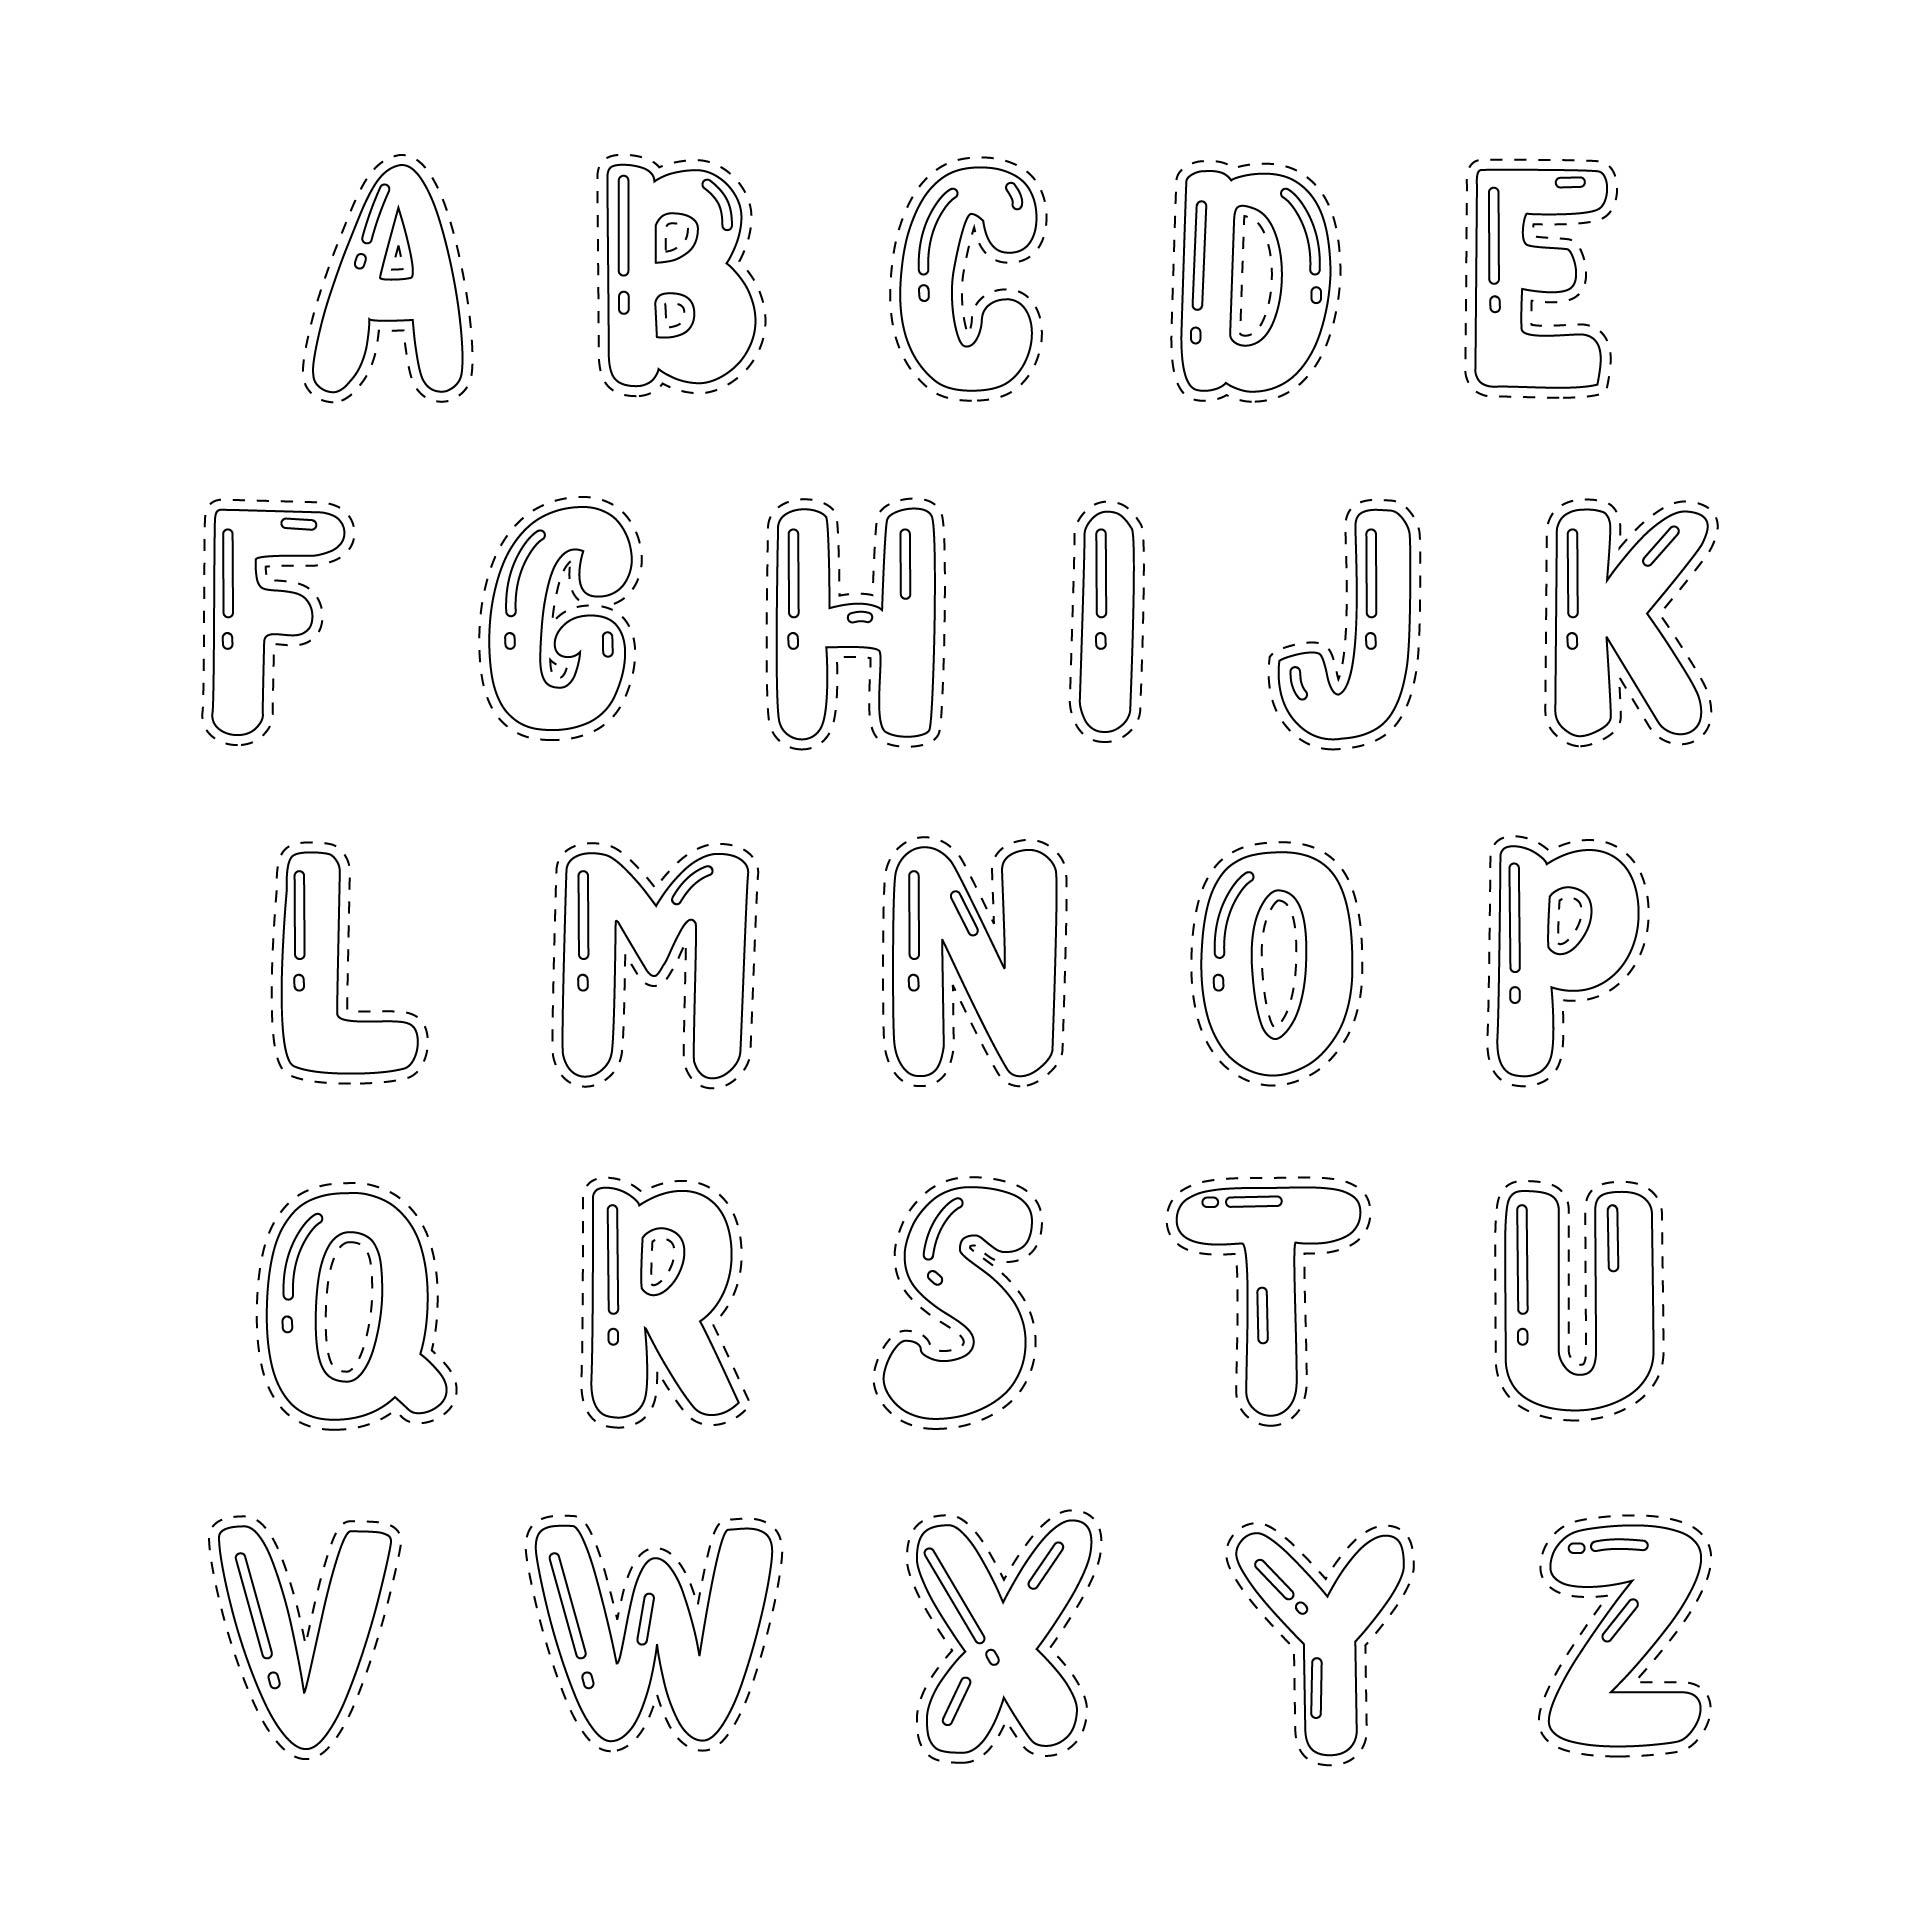 6 Inch Bubble Letters - 20 Free PDF Printables | Printablee